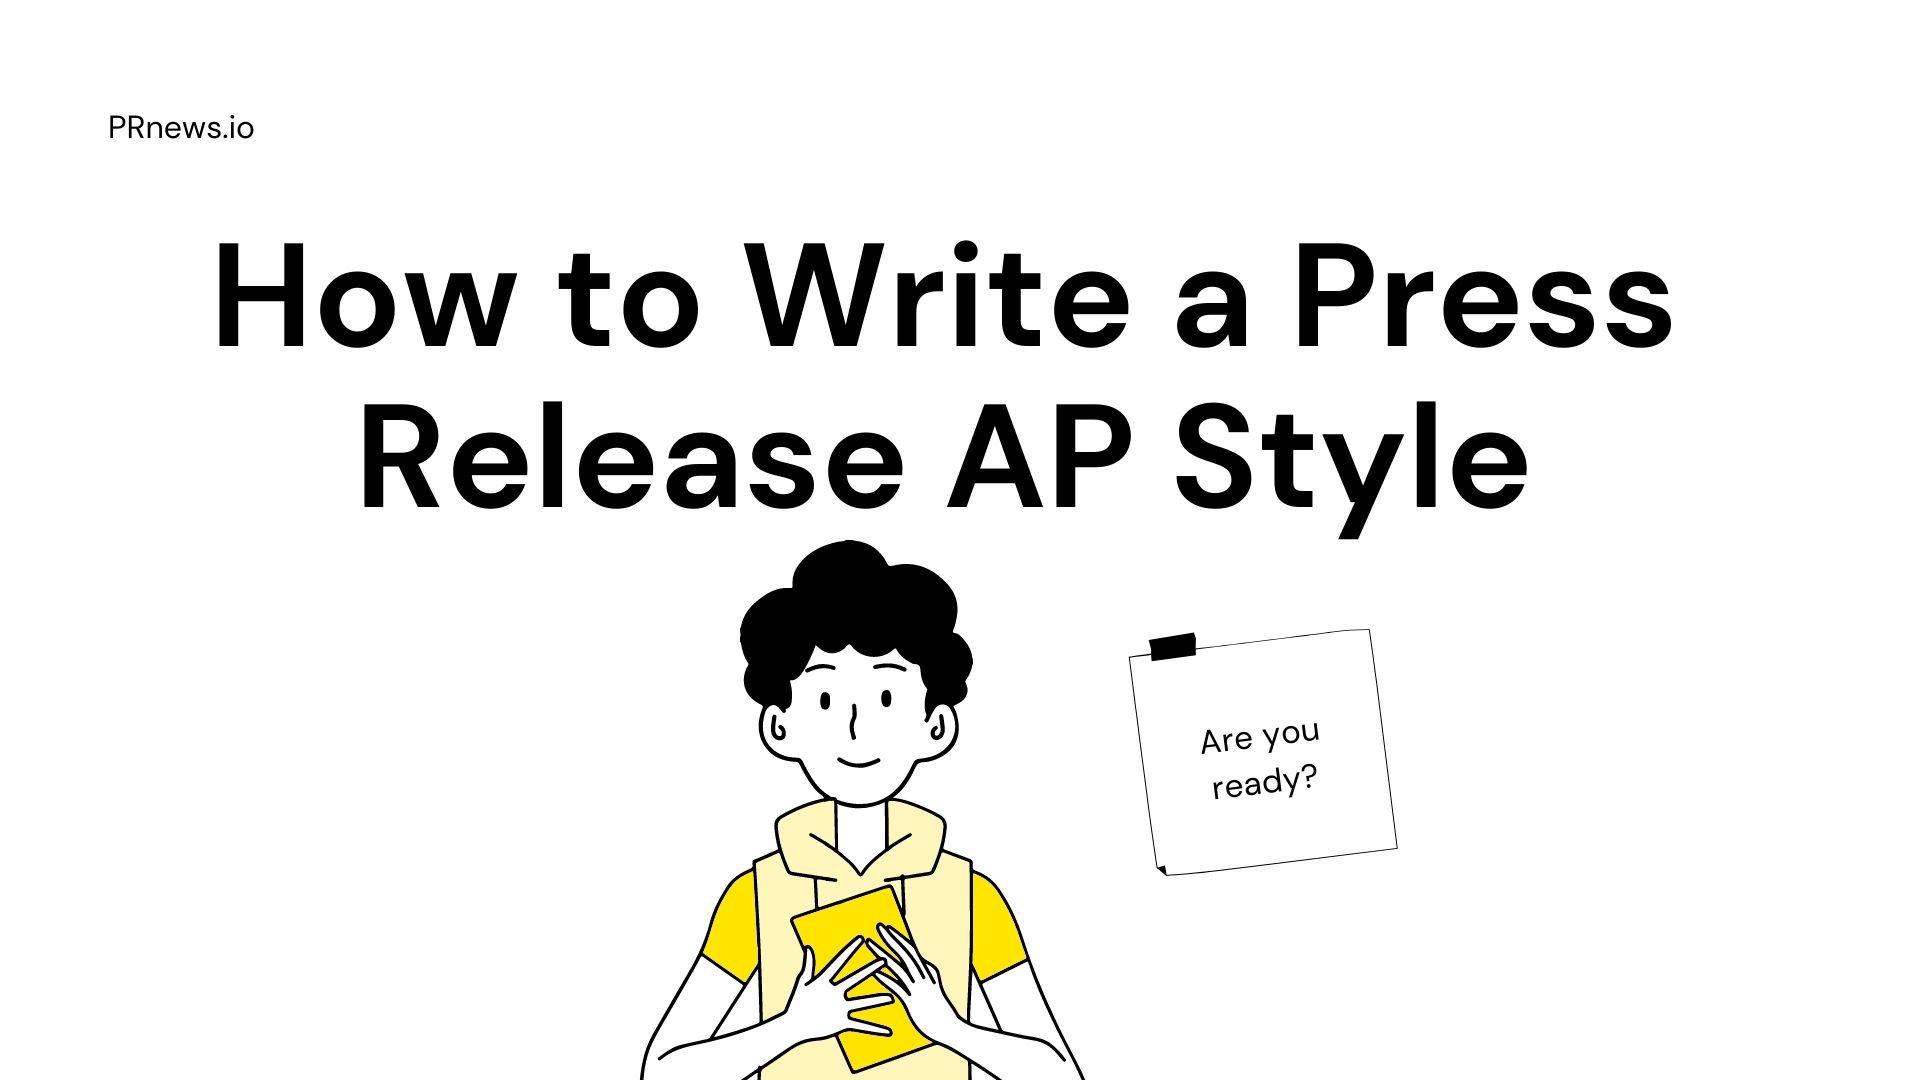 How to Write a Press Release AP Style - PRNEWS Blog